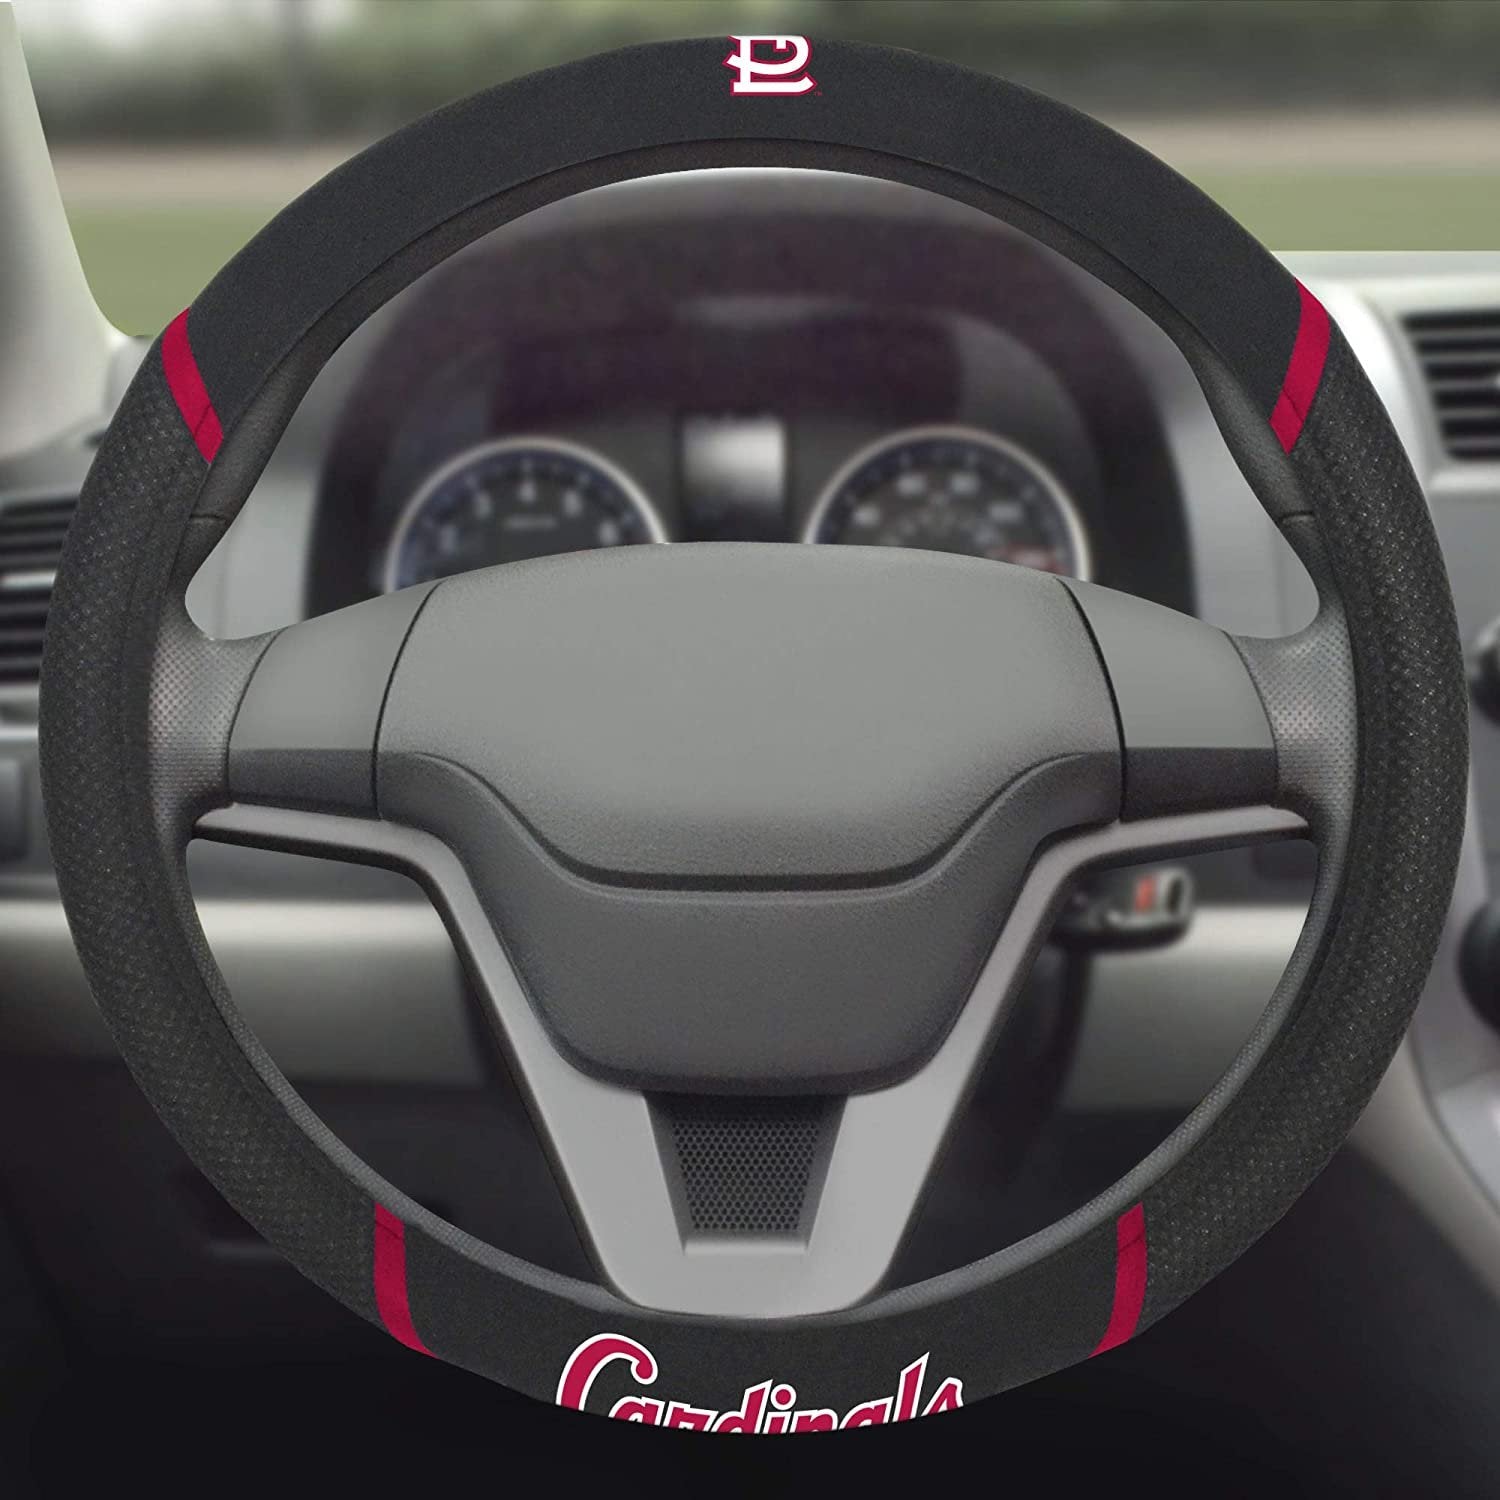 St Louis Cardinals Steering Wheel Cover Premium Embroidered Black 15 Inch